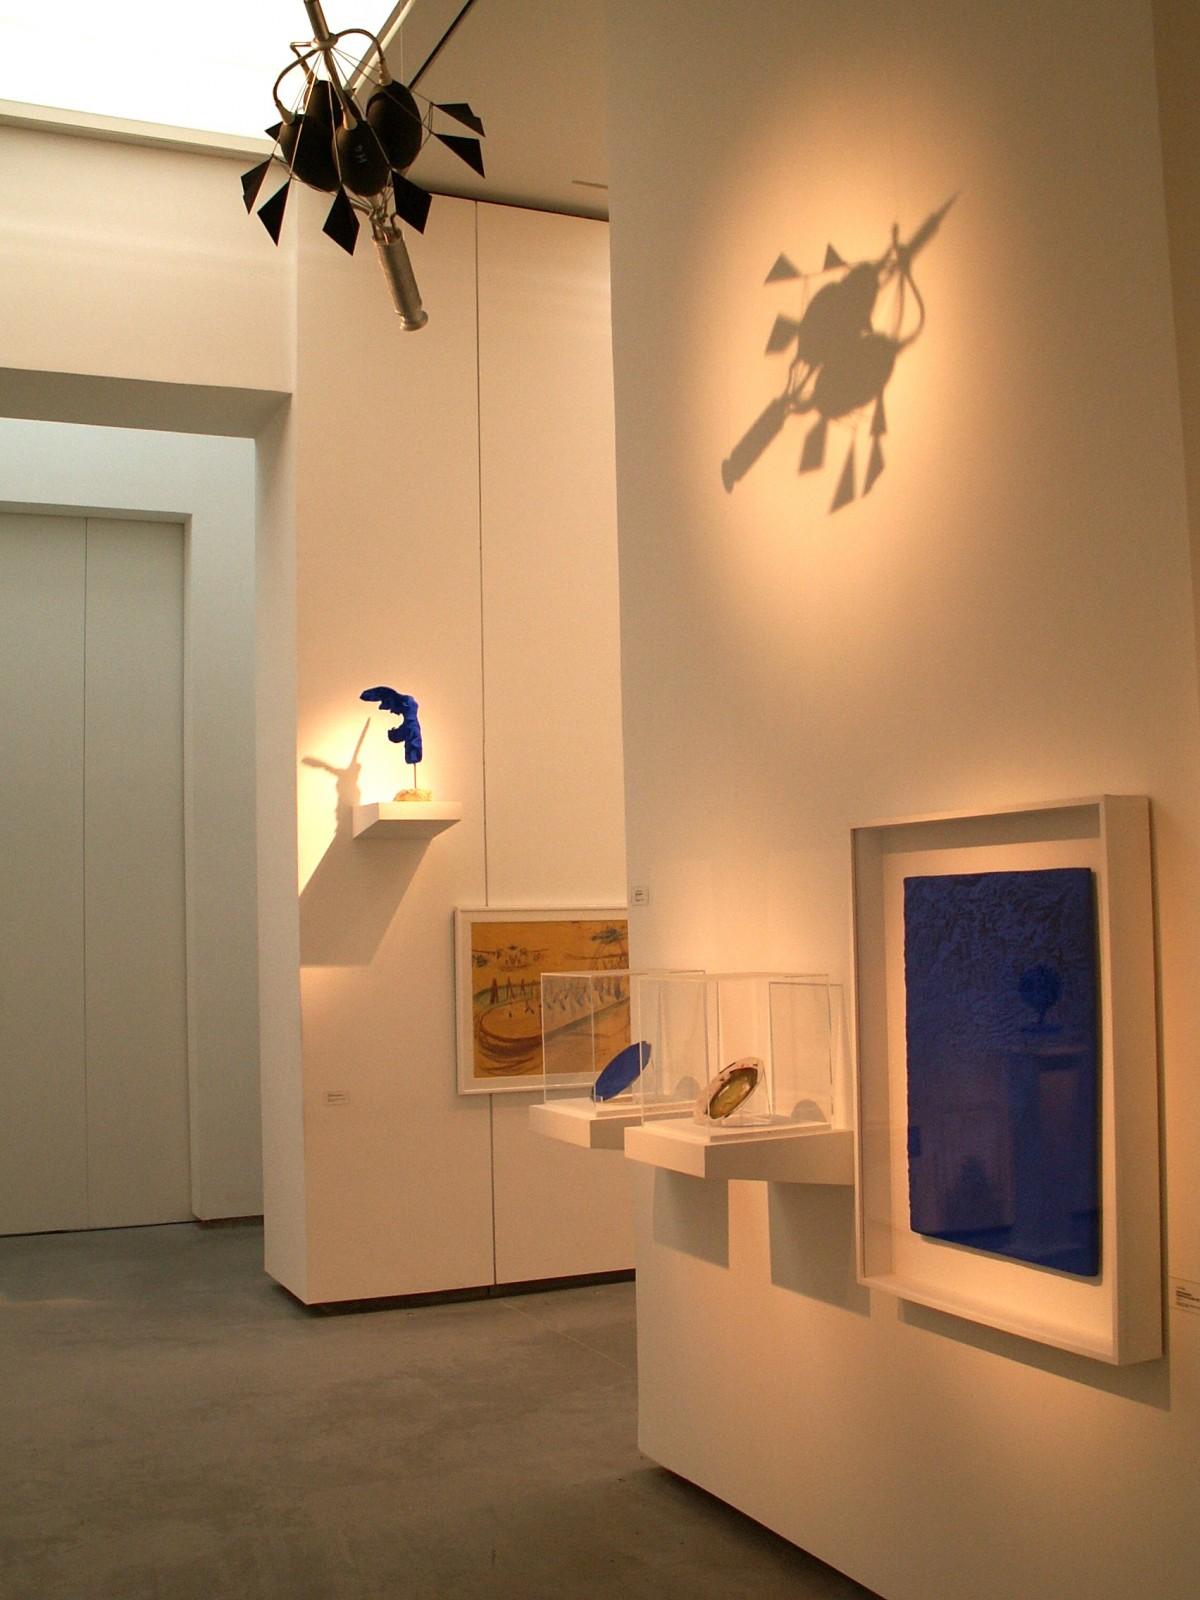 View of the exhibition, "Marie Raymond - Yves Klein", Musée des Beaux-Arts d'Angers, 2004